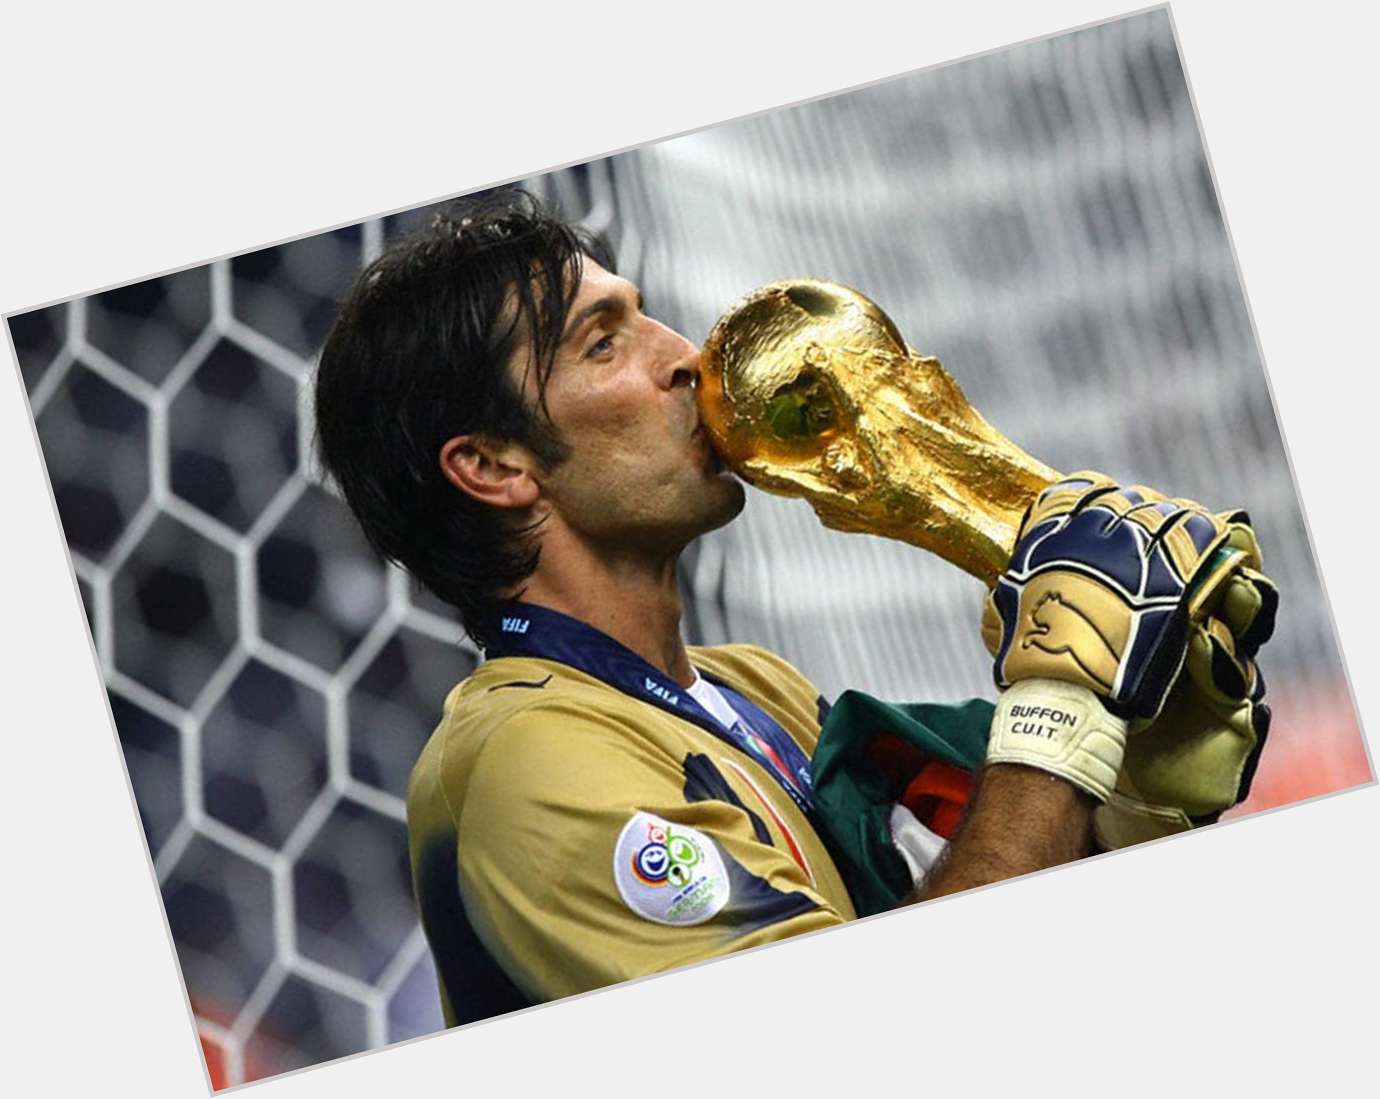   Happy Birthday to one of the greatest of all time...Gianluigi Buffon 43 and counting!  SUPERMAN  